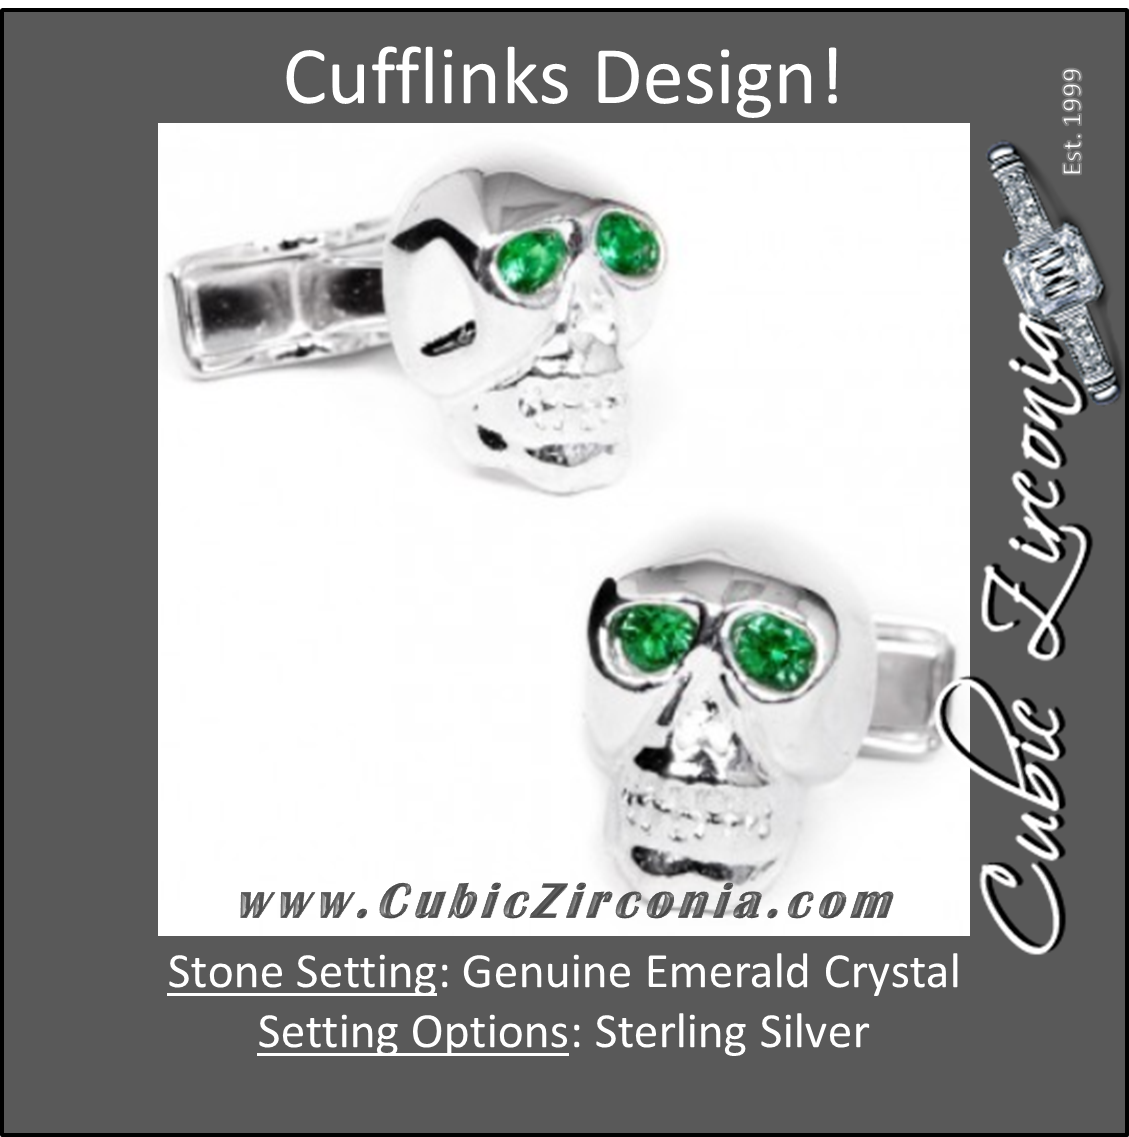 Men’s Cufflinks- Sterling Silver Skulls (set with emerald green crystals for eyes)